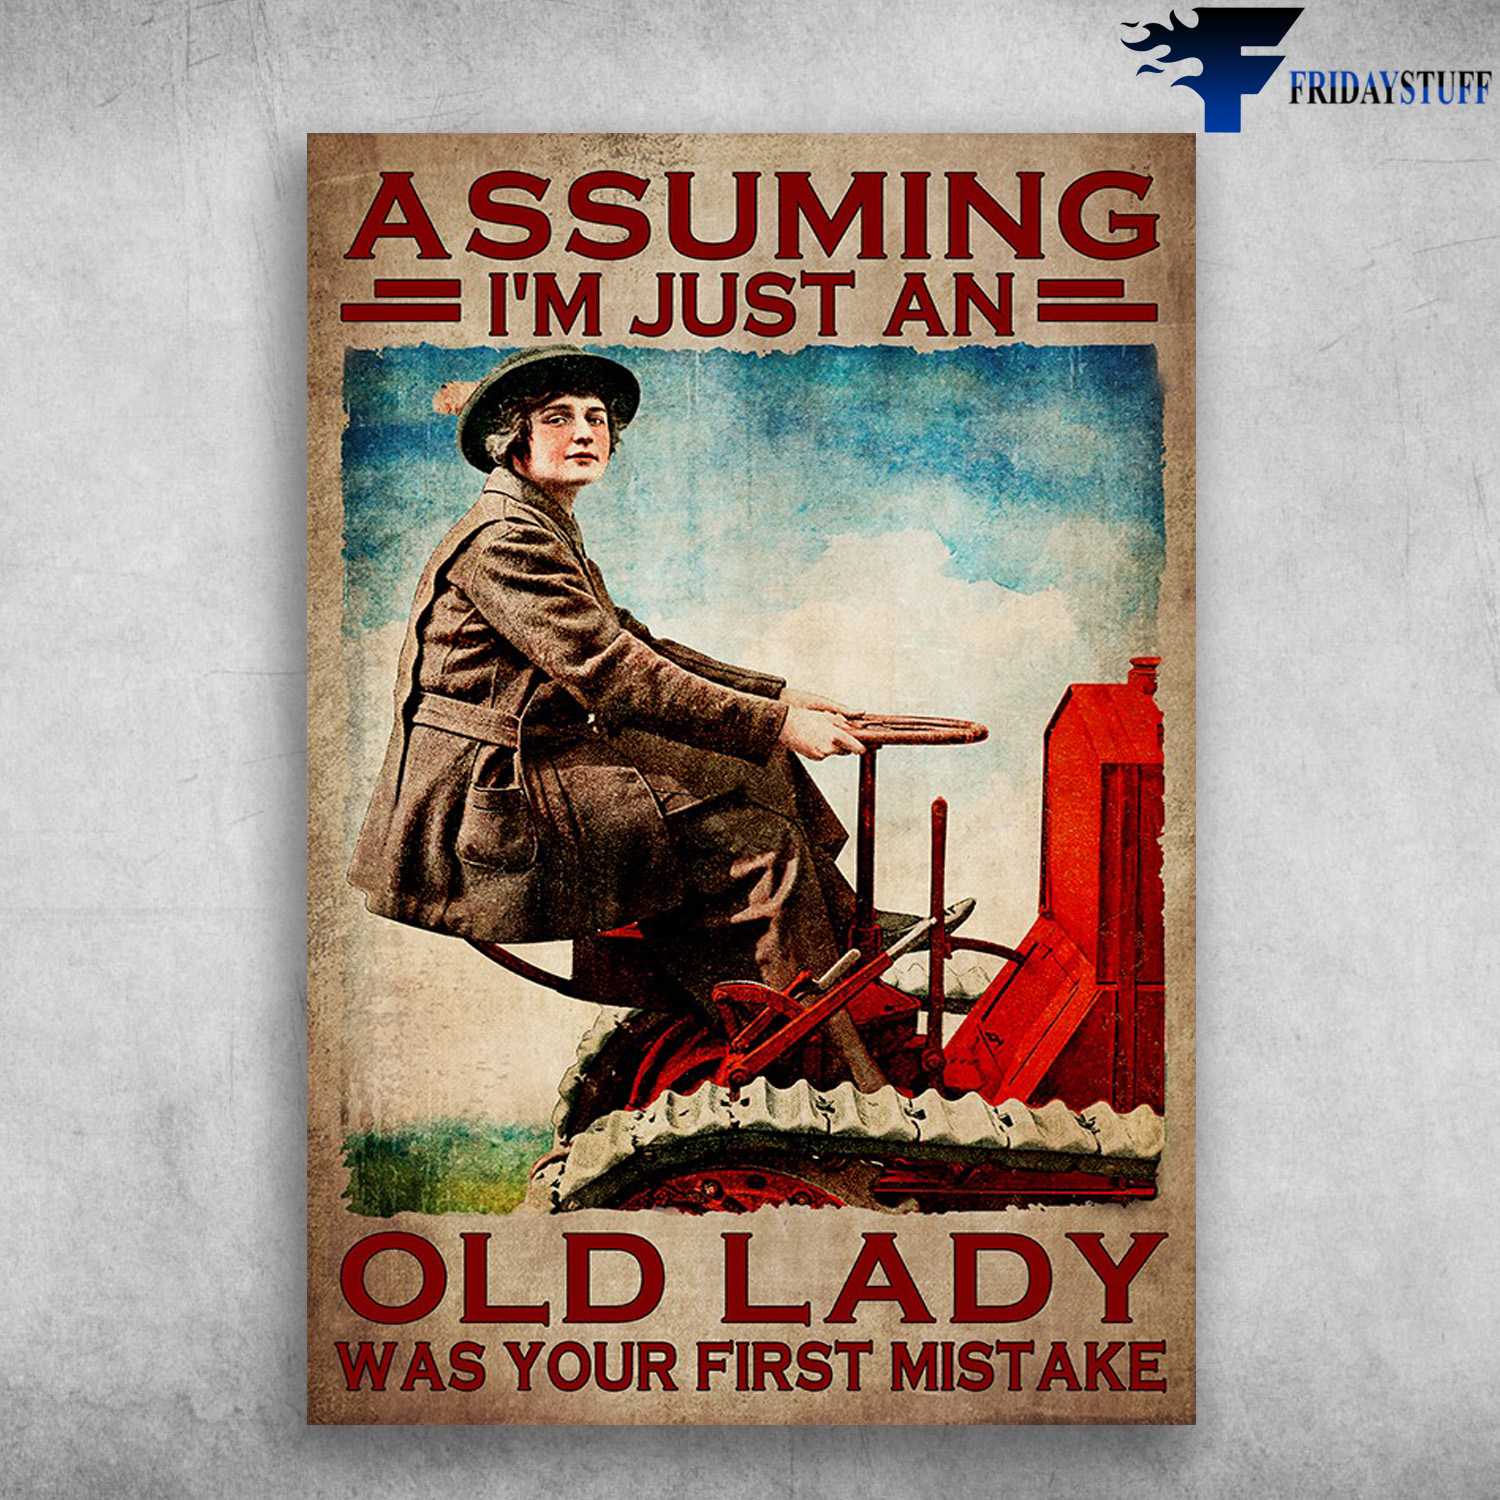 Lady Agrimotor - Assuming I'm Just An Old Lady, Was Your First Mistake